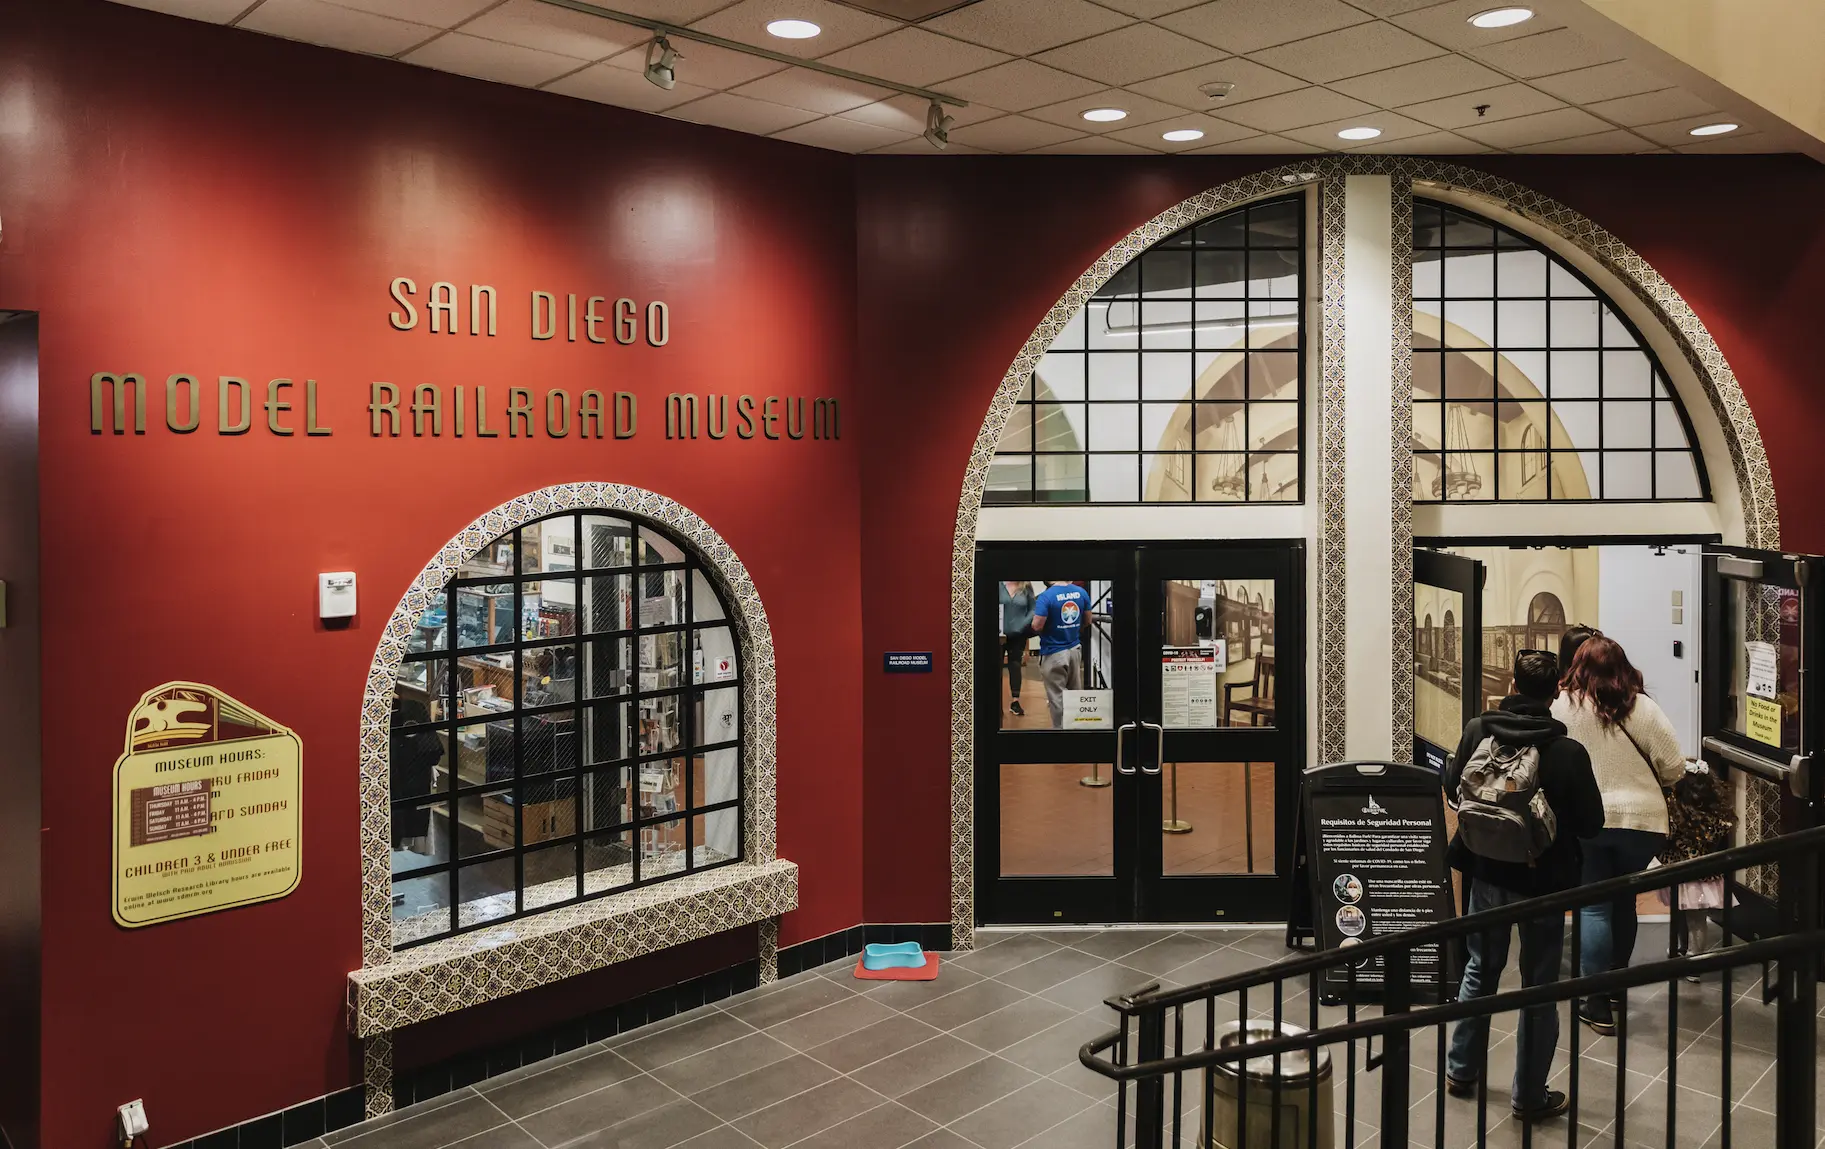 Entrance to the San Diego Model Railroad Museum. The entrance is a red painted wall with an arched glass windows and black framed glass doors.